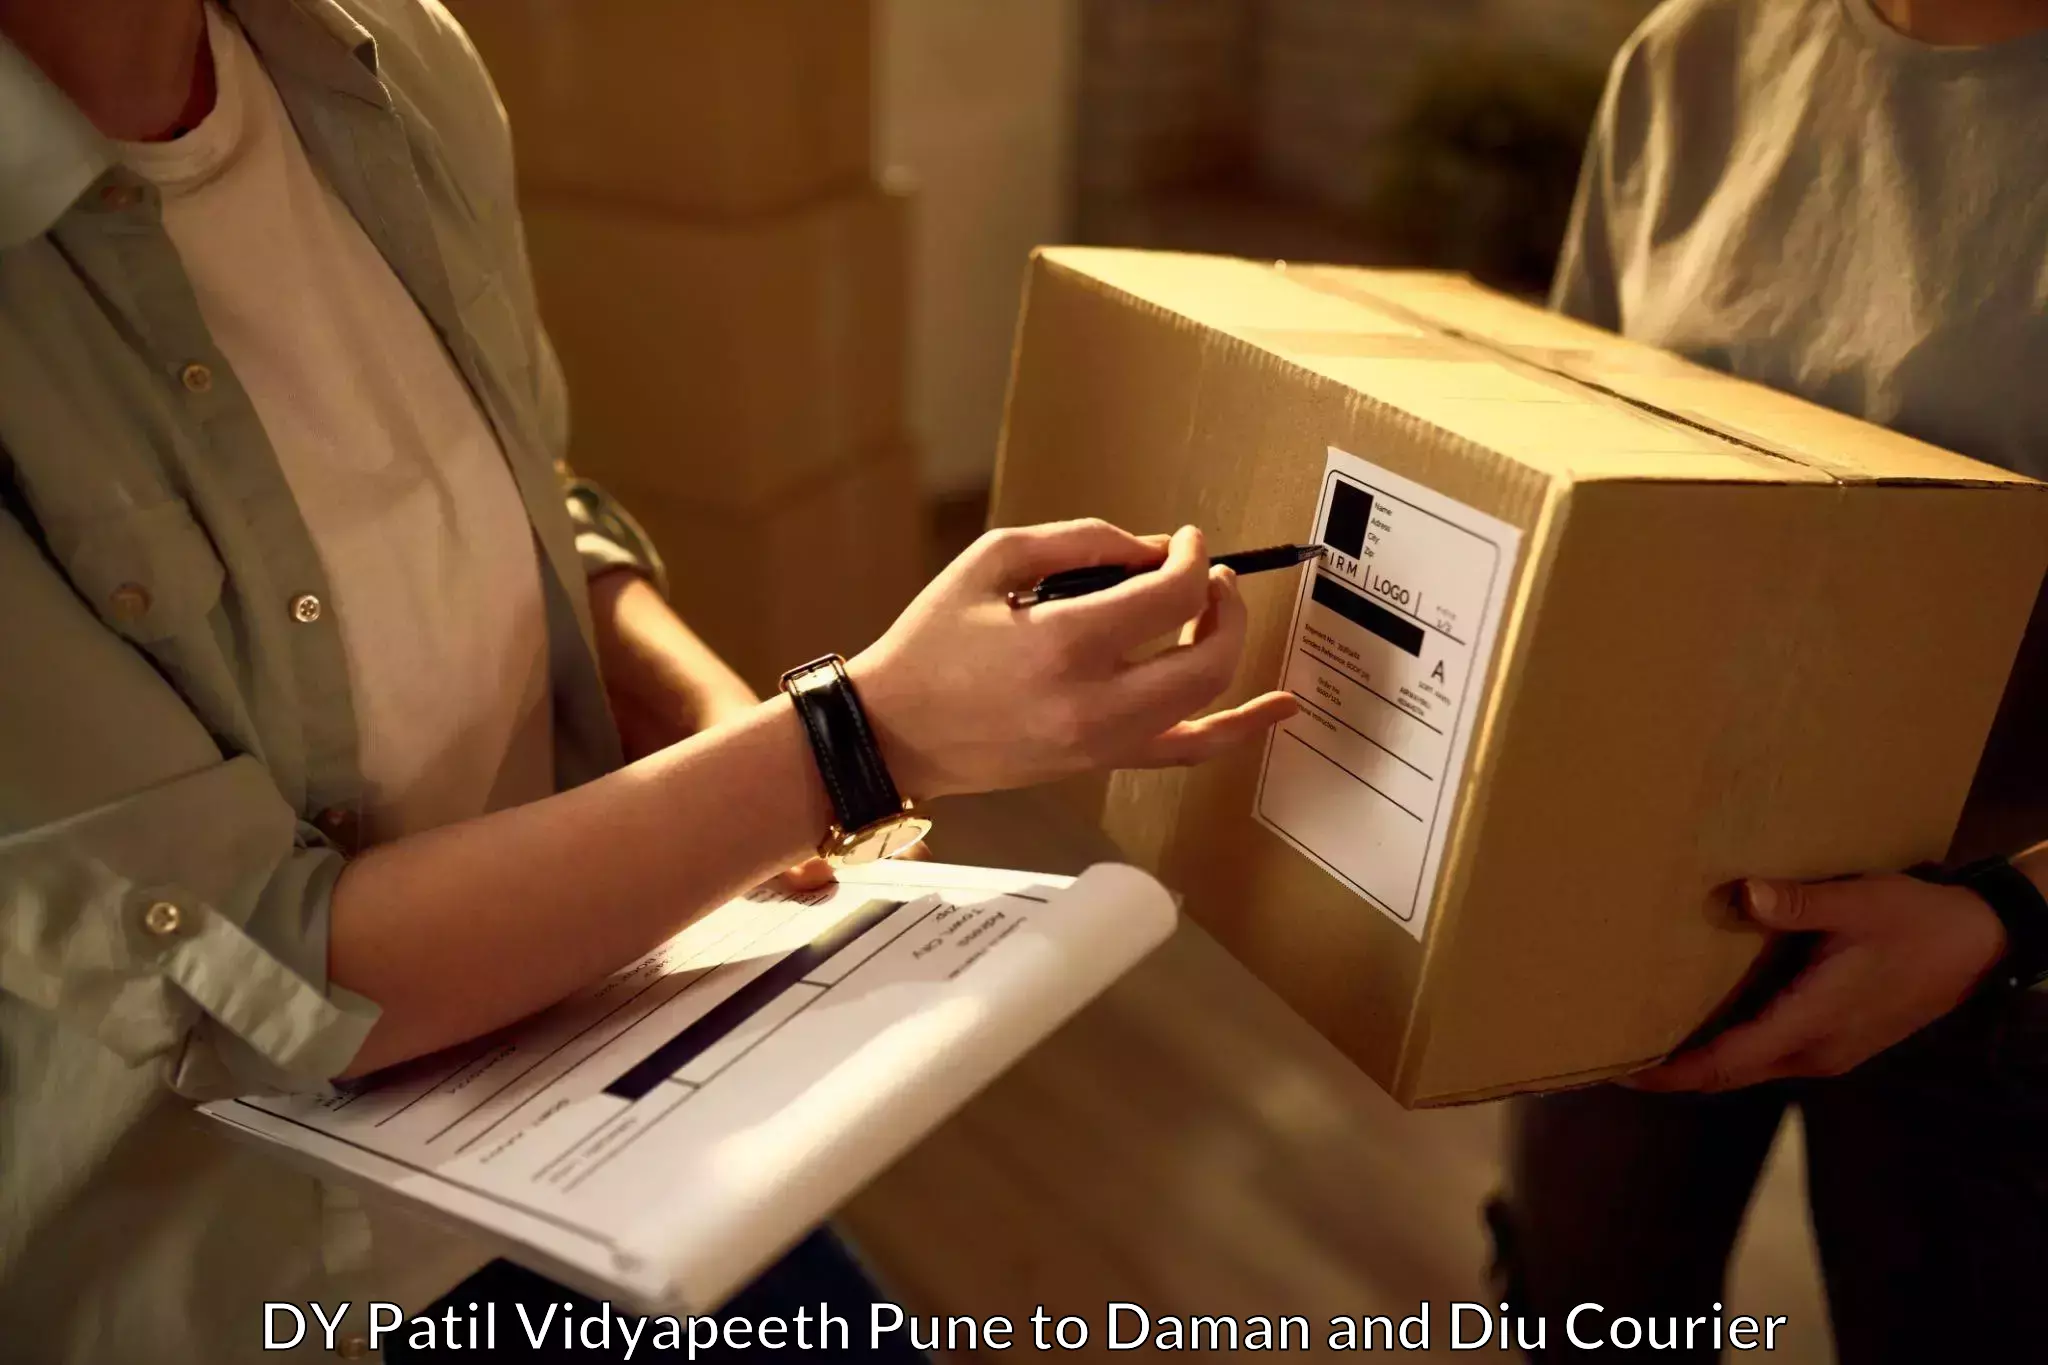 Multi-national courier services DY Patil Vidyapeeth Pune to Diu